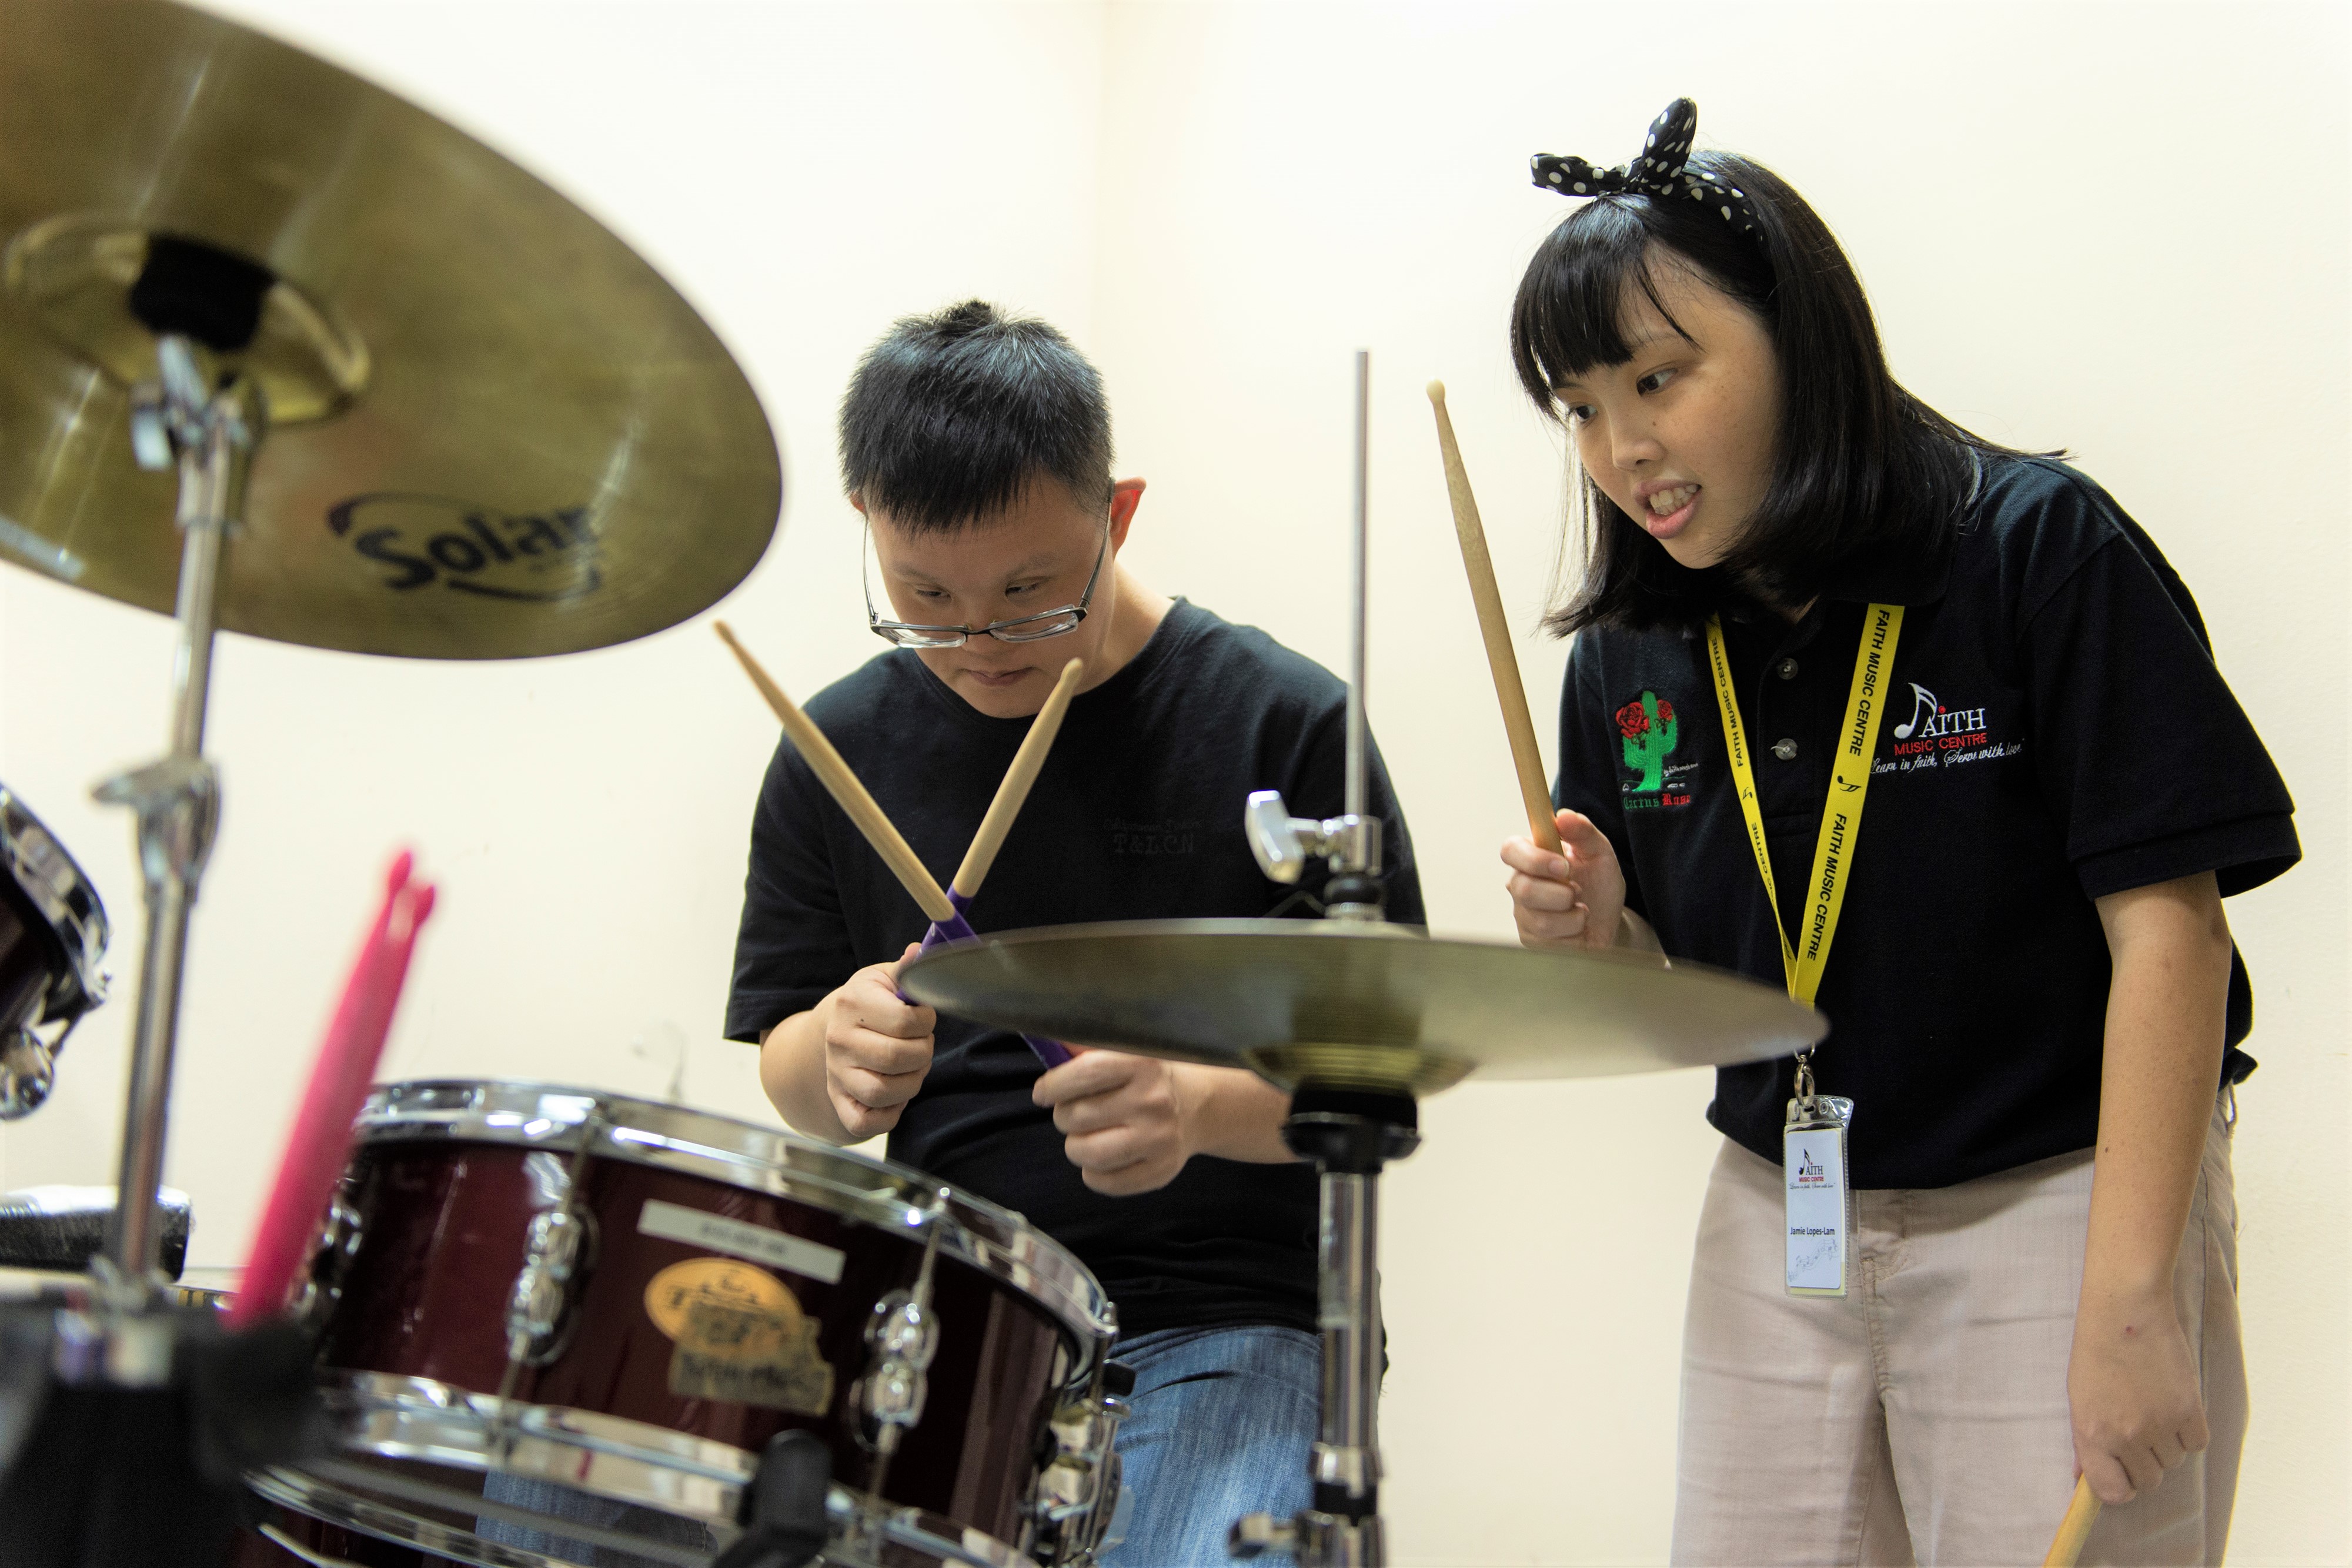 Two youth with special needs playing the drums at Faith Music Centre